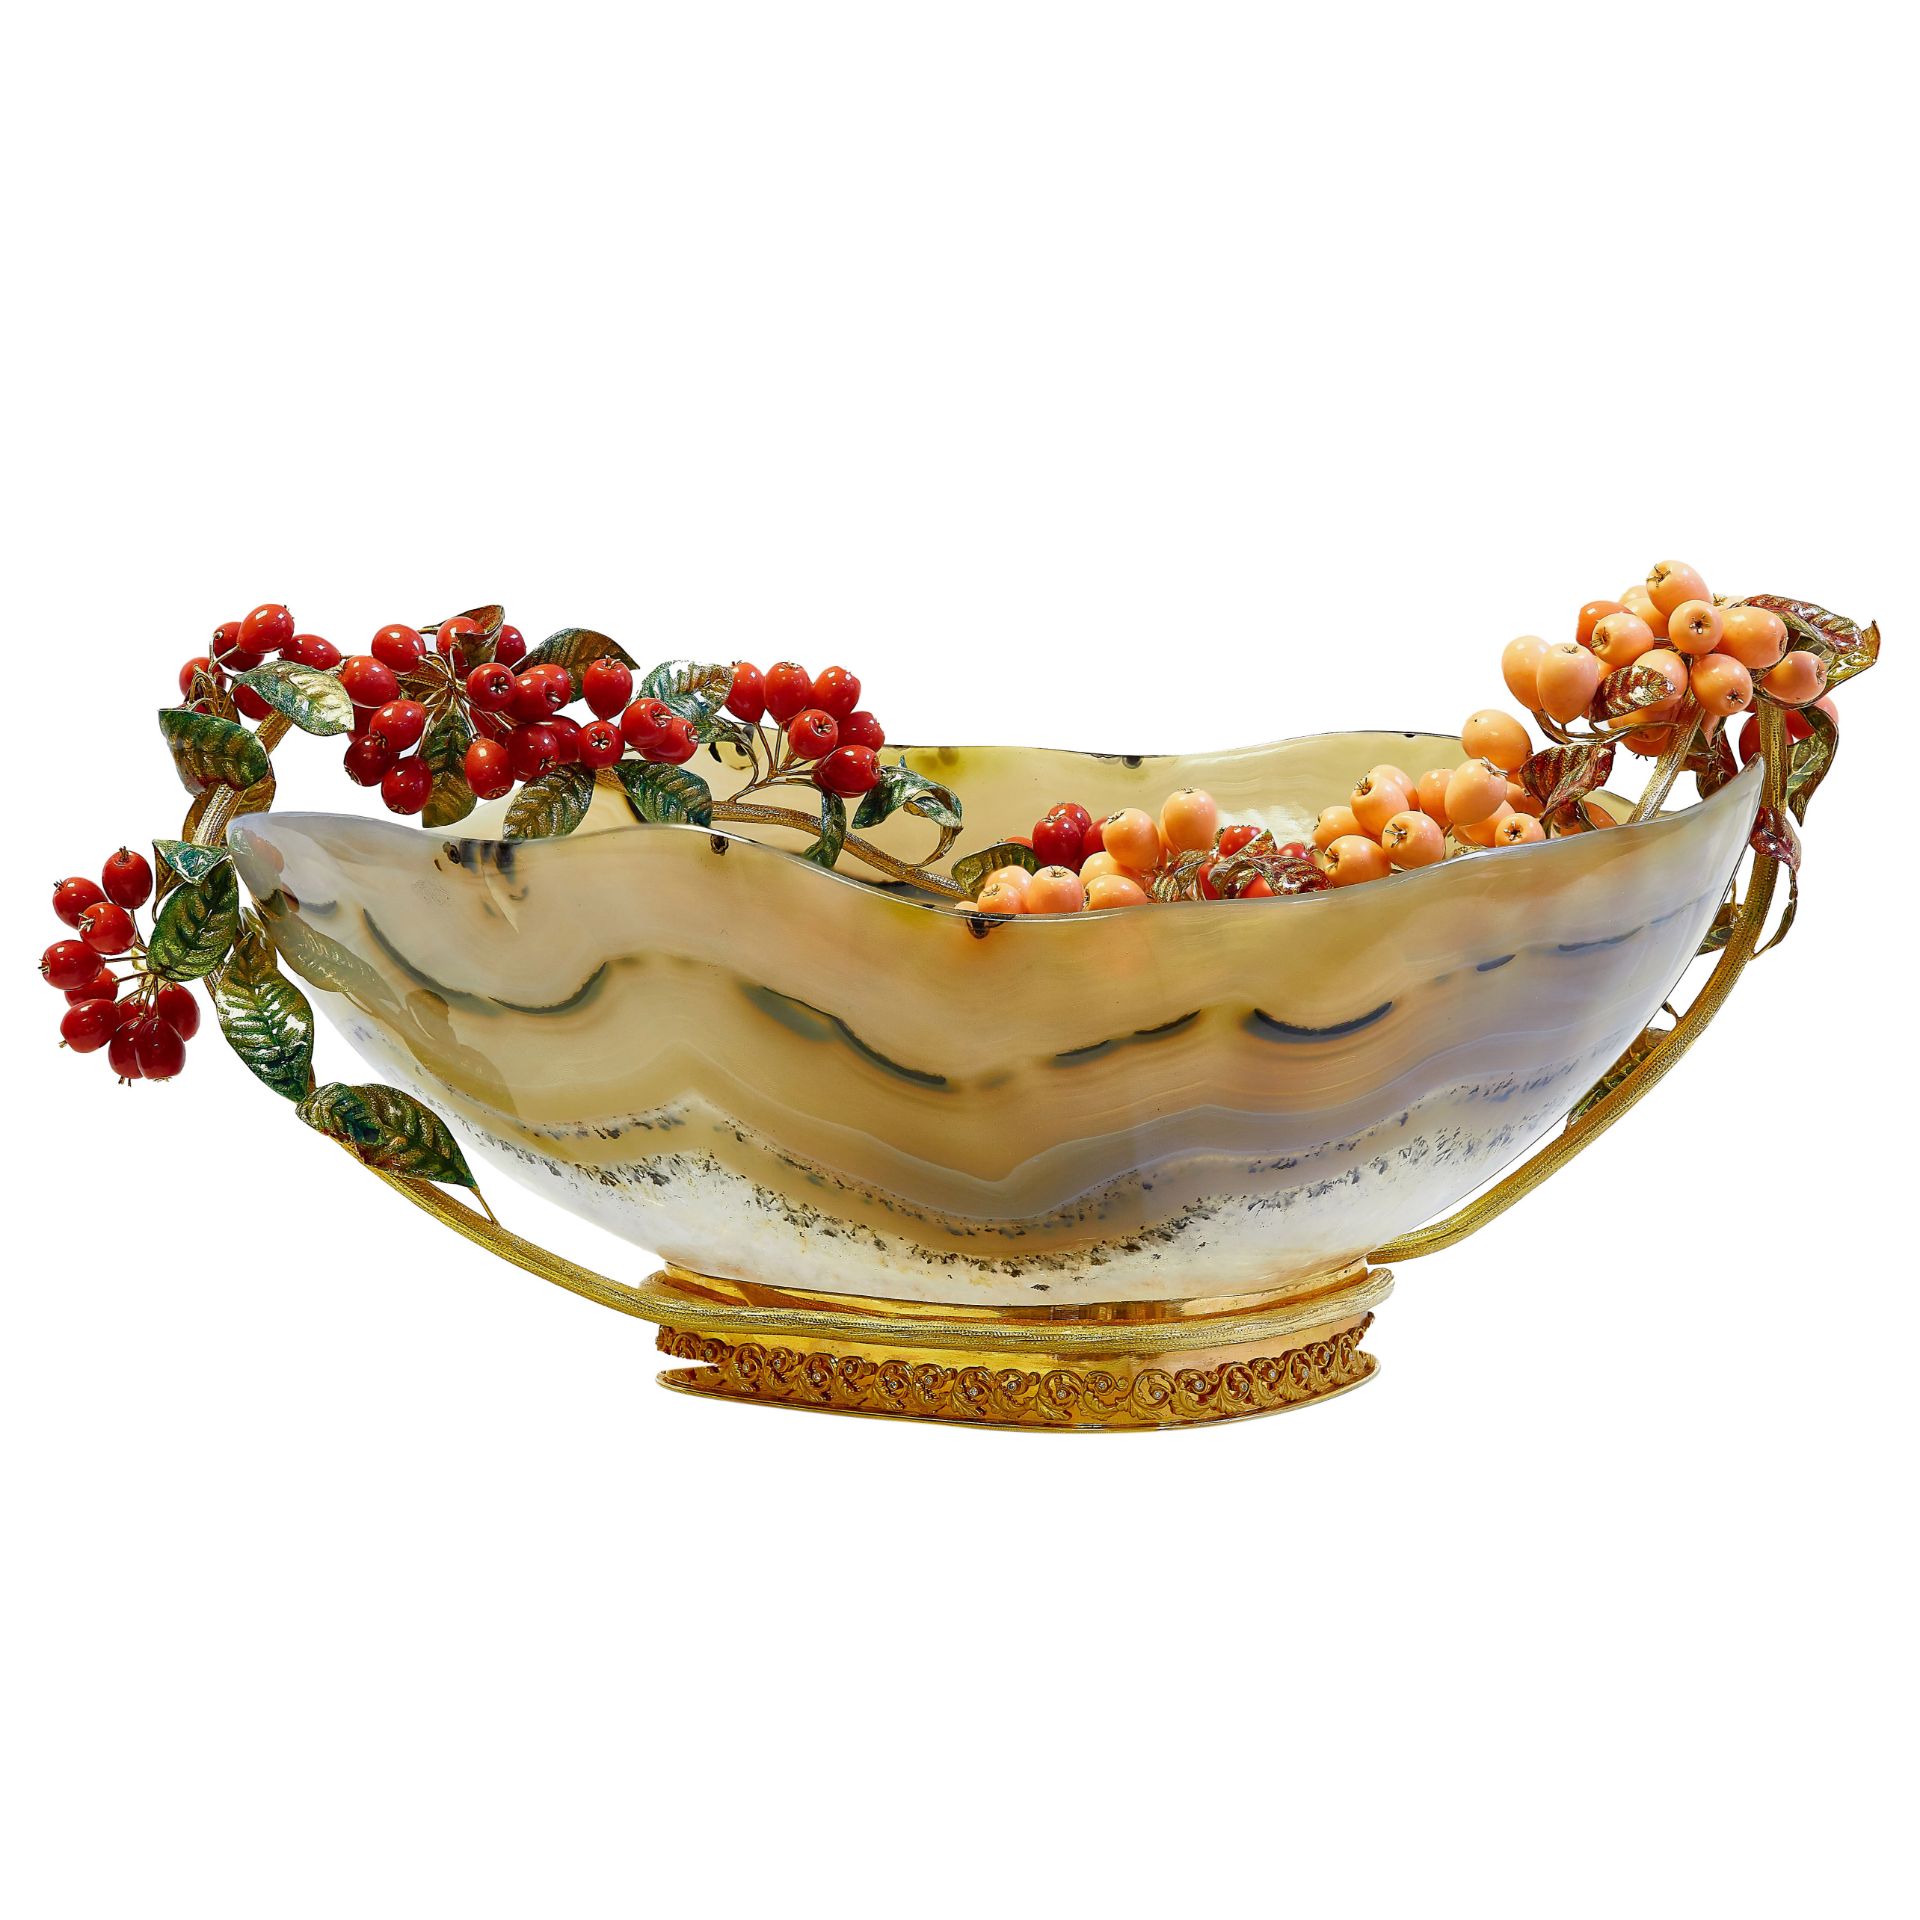 MAGNIFICANT 18-ct GOLD, AGATE, ENAMEL AND CORAL CENTERPIECE